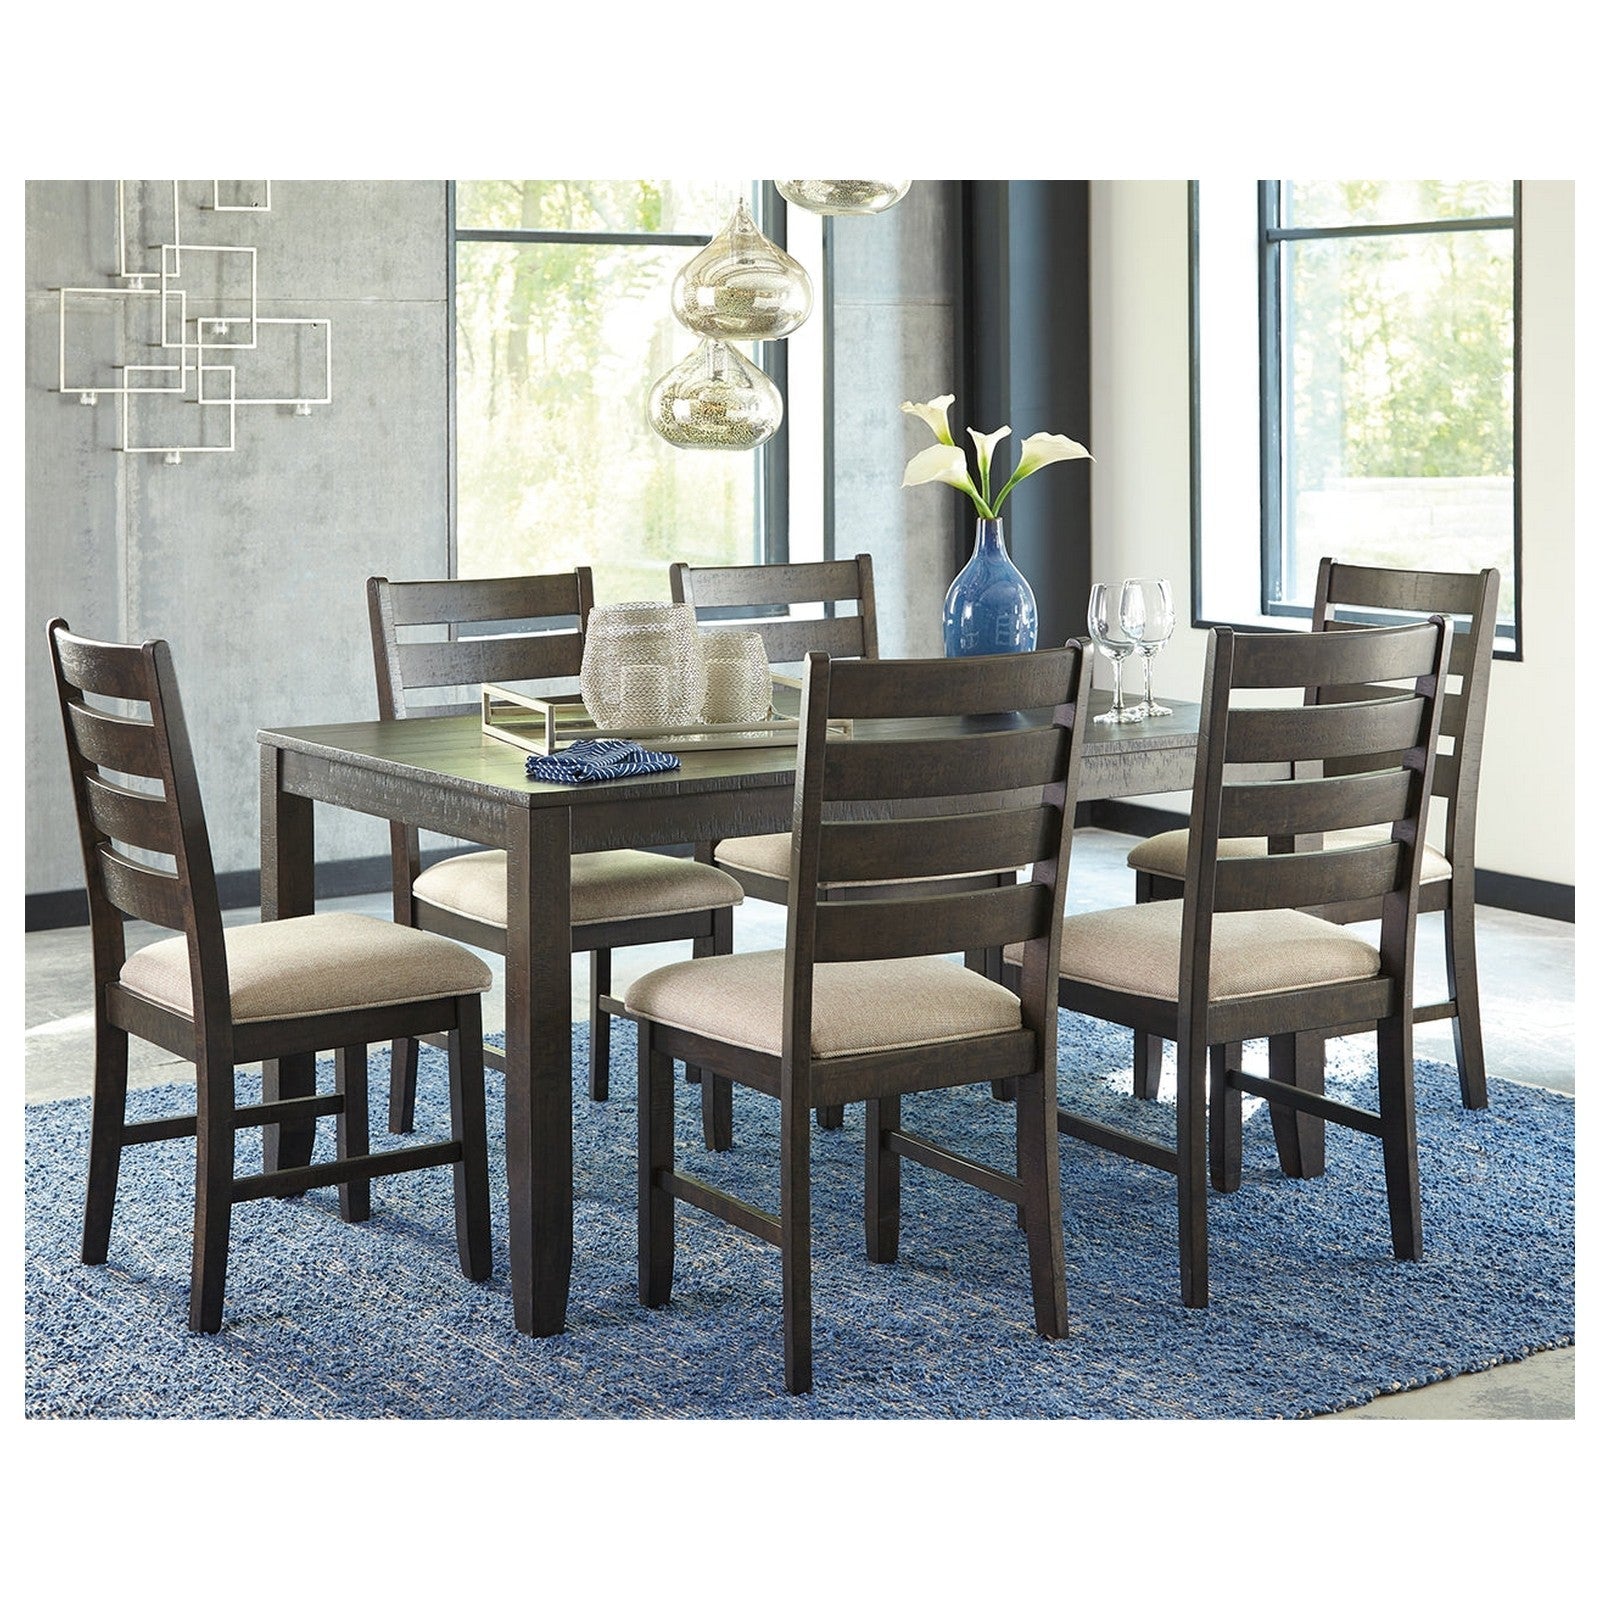 Rokane Dining Table and Chairs (Set of 7) Ash-D397-425